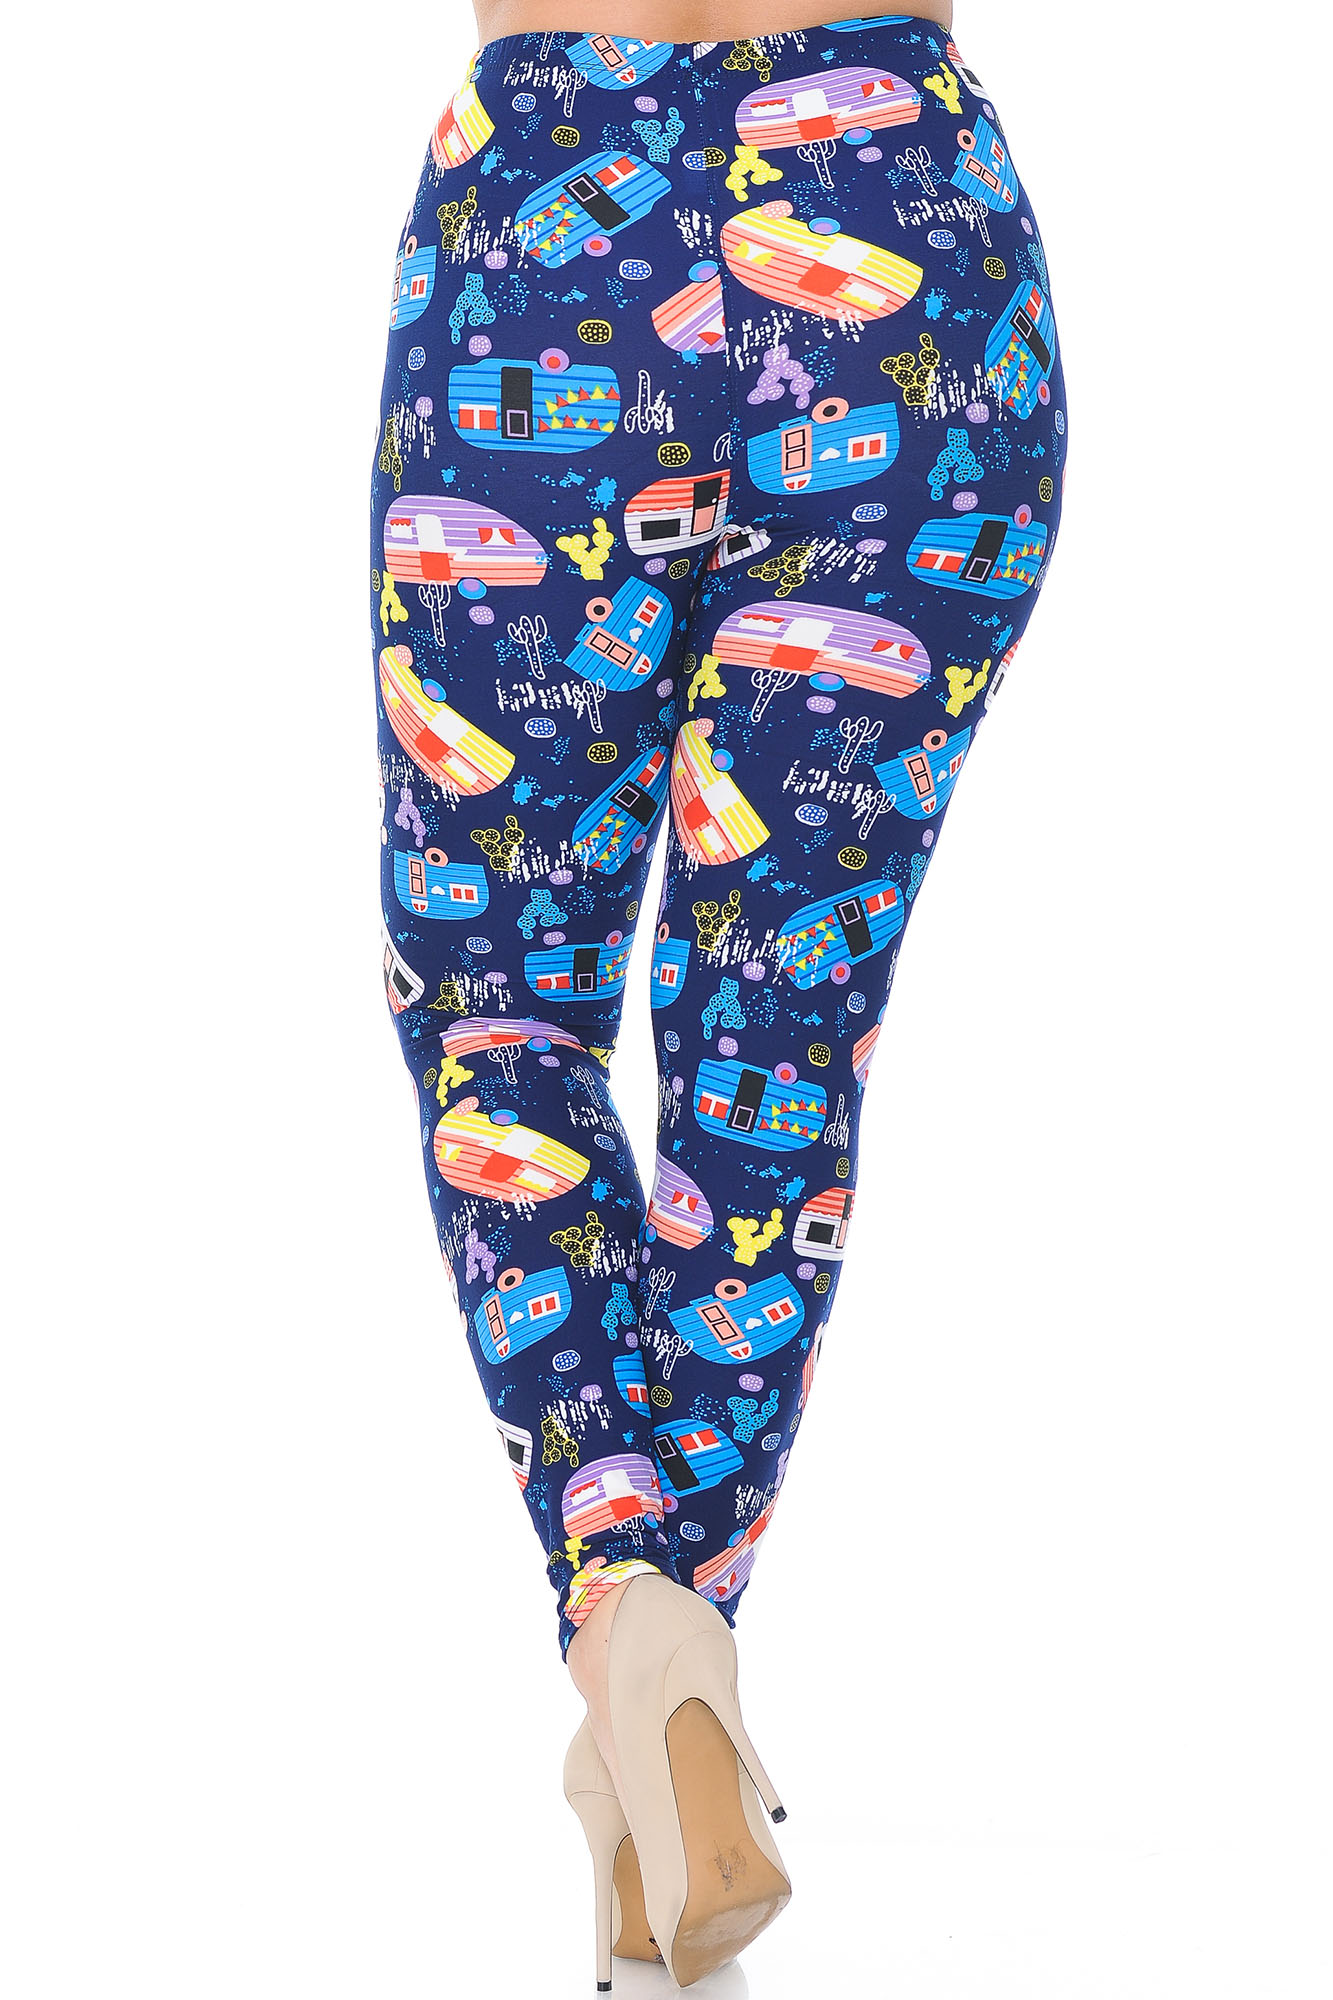 Wholesale Buttery Smooth Retro Campers Plus Size Leggings - 3X-5X